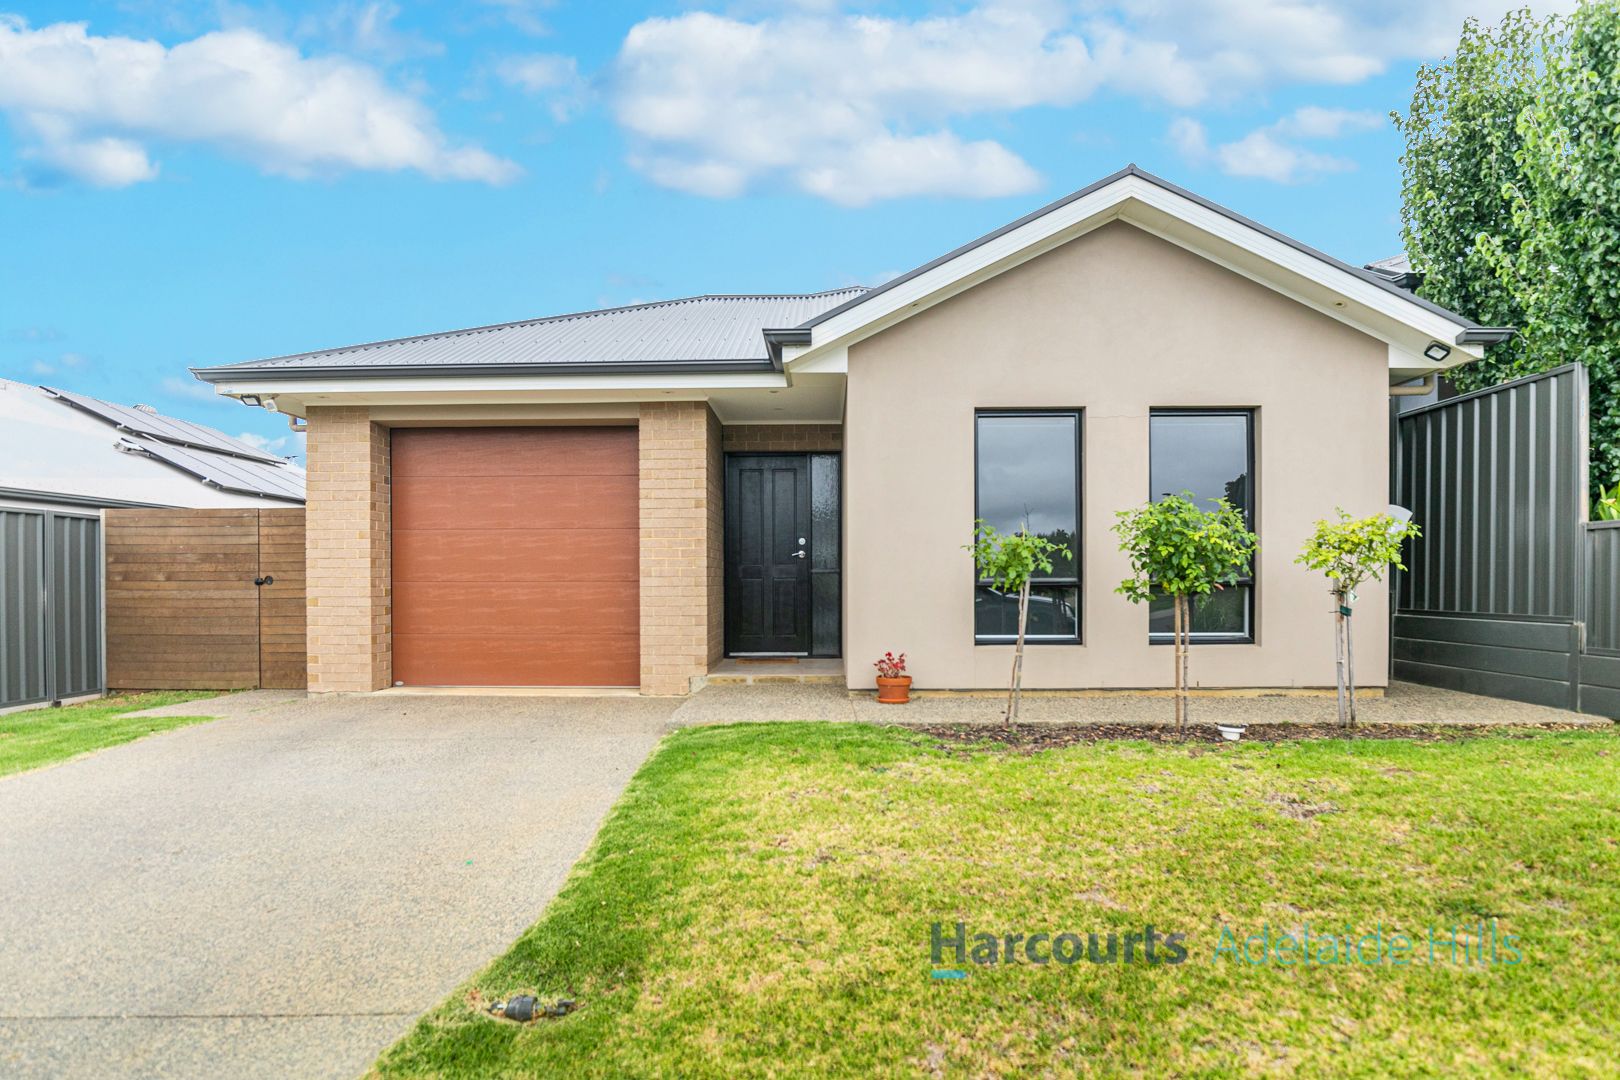 3 bedrooms House in 7 Skipton Crescent MOUNT BARKER SA, 5251